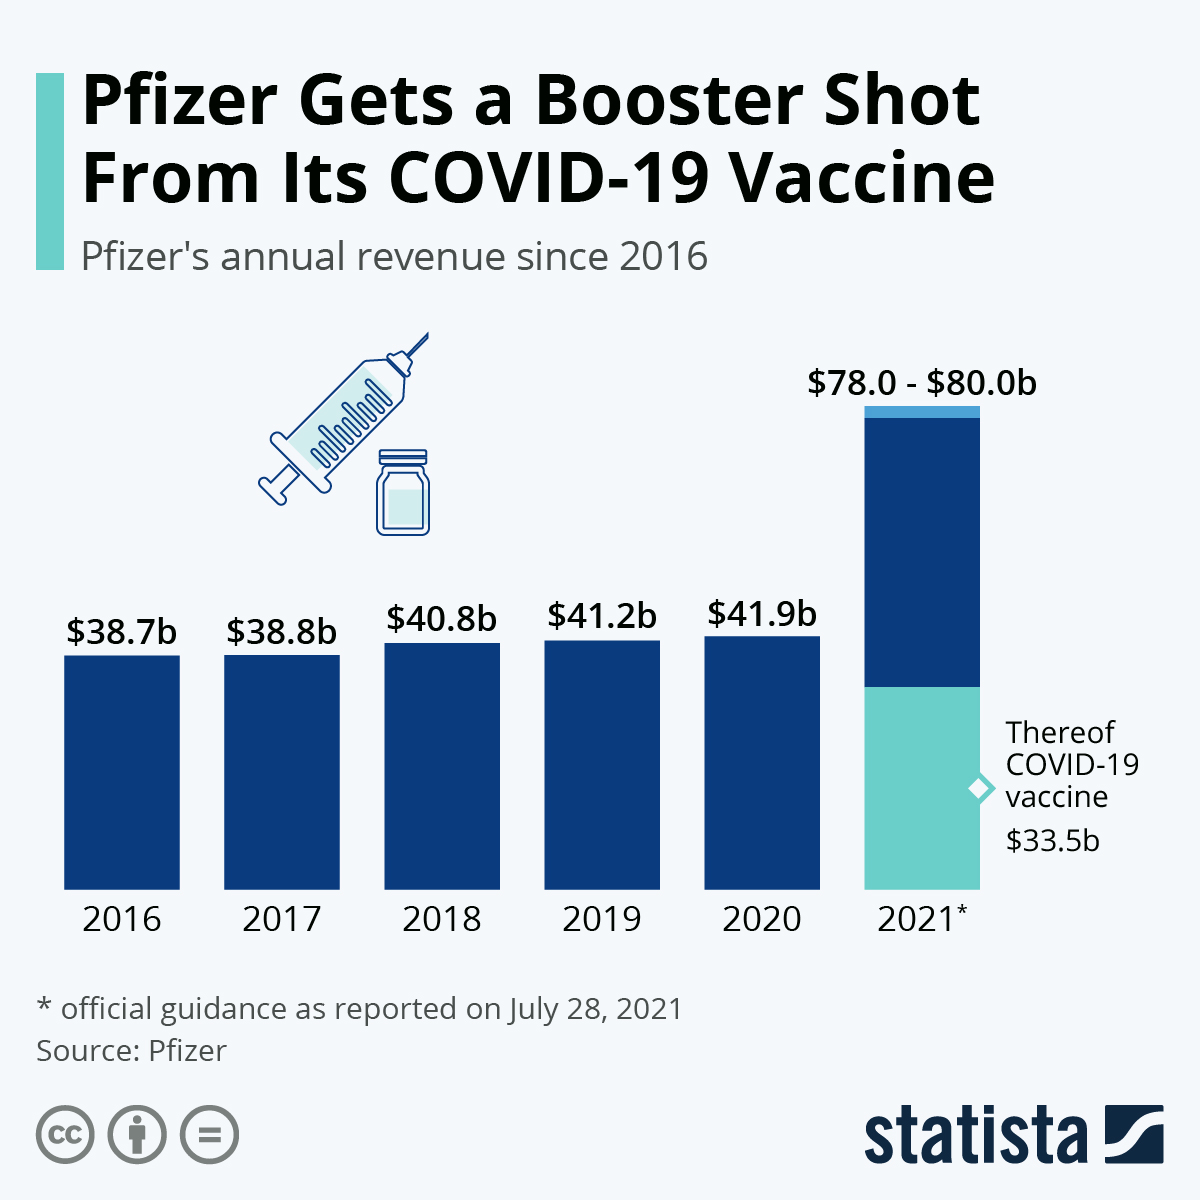 Pfizer Gets a Booster Shot From Its COVID-19 Vaccine